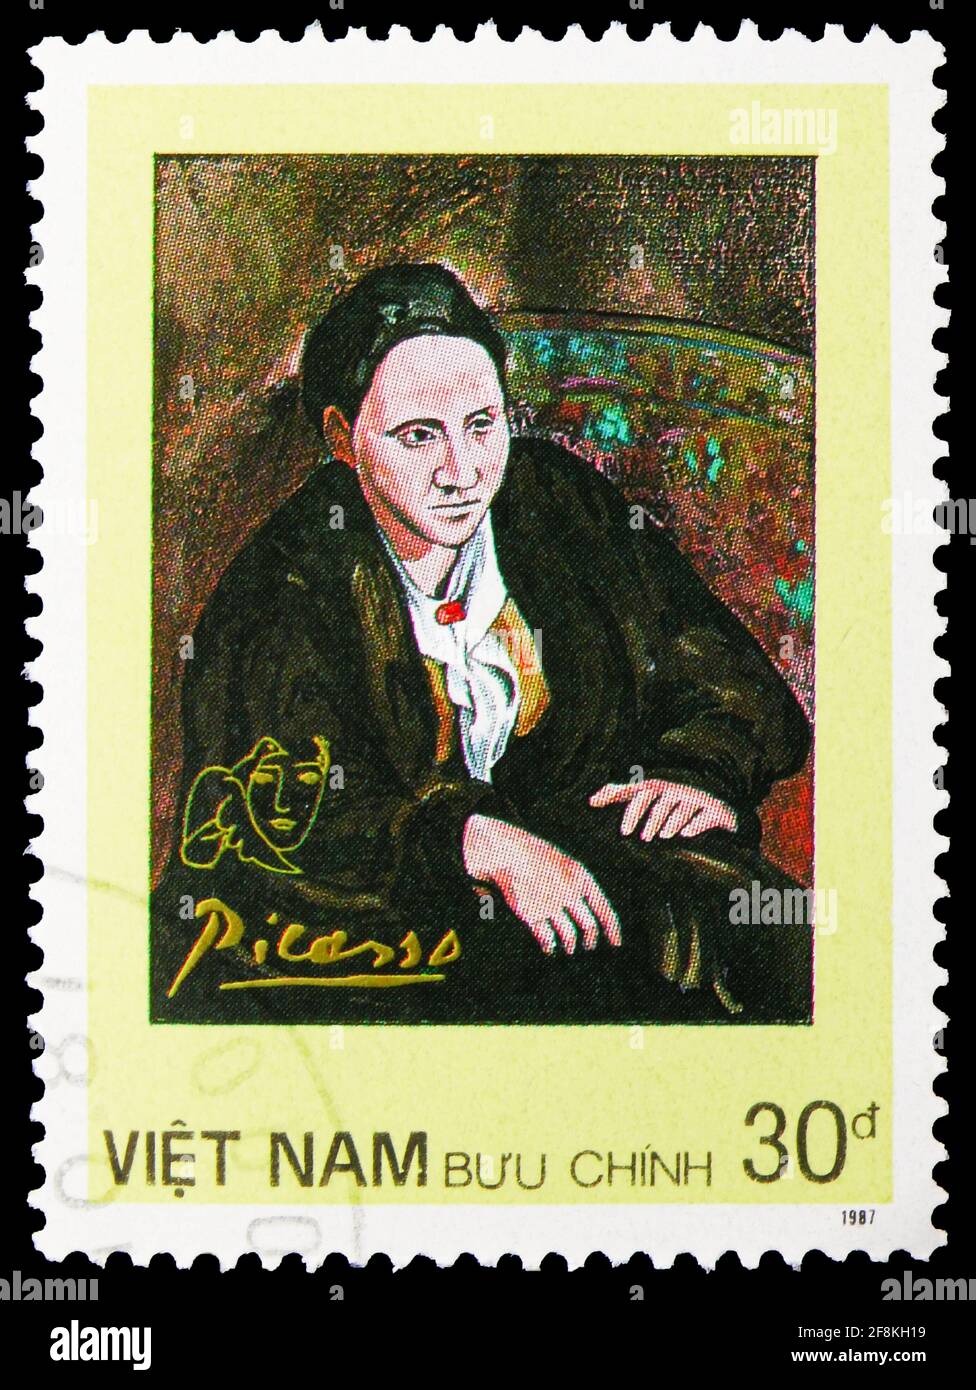 MOSCOW, RUSSIA - NOVEMBER 10, 2019: Postage stamp printed in Vietnam shows Gertrude Stein, Picasso Paintings serie, circa 1987 Stock Photo